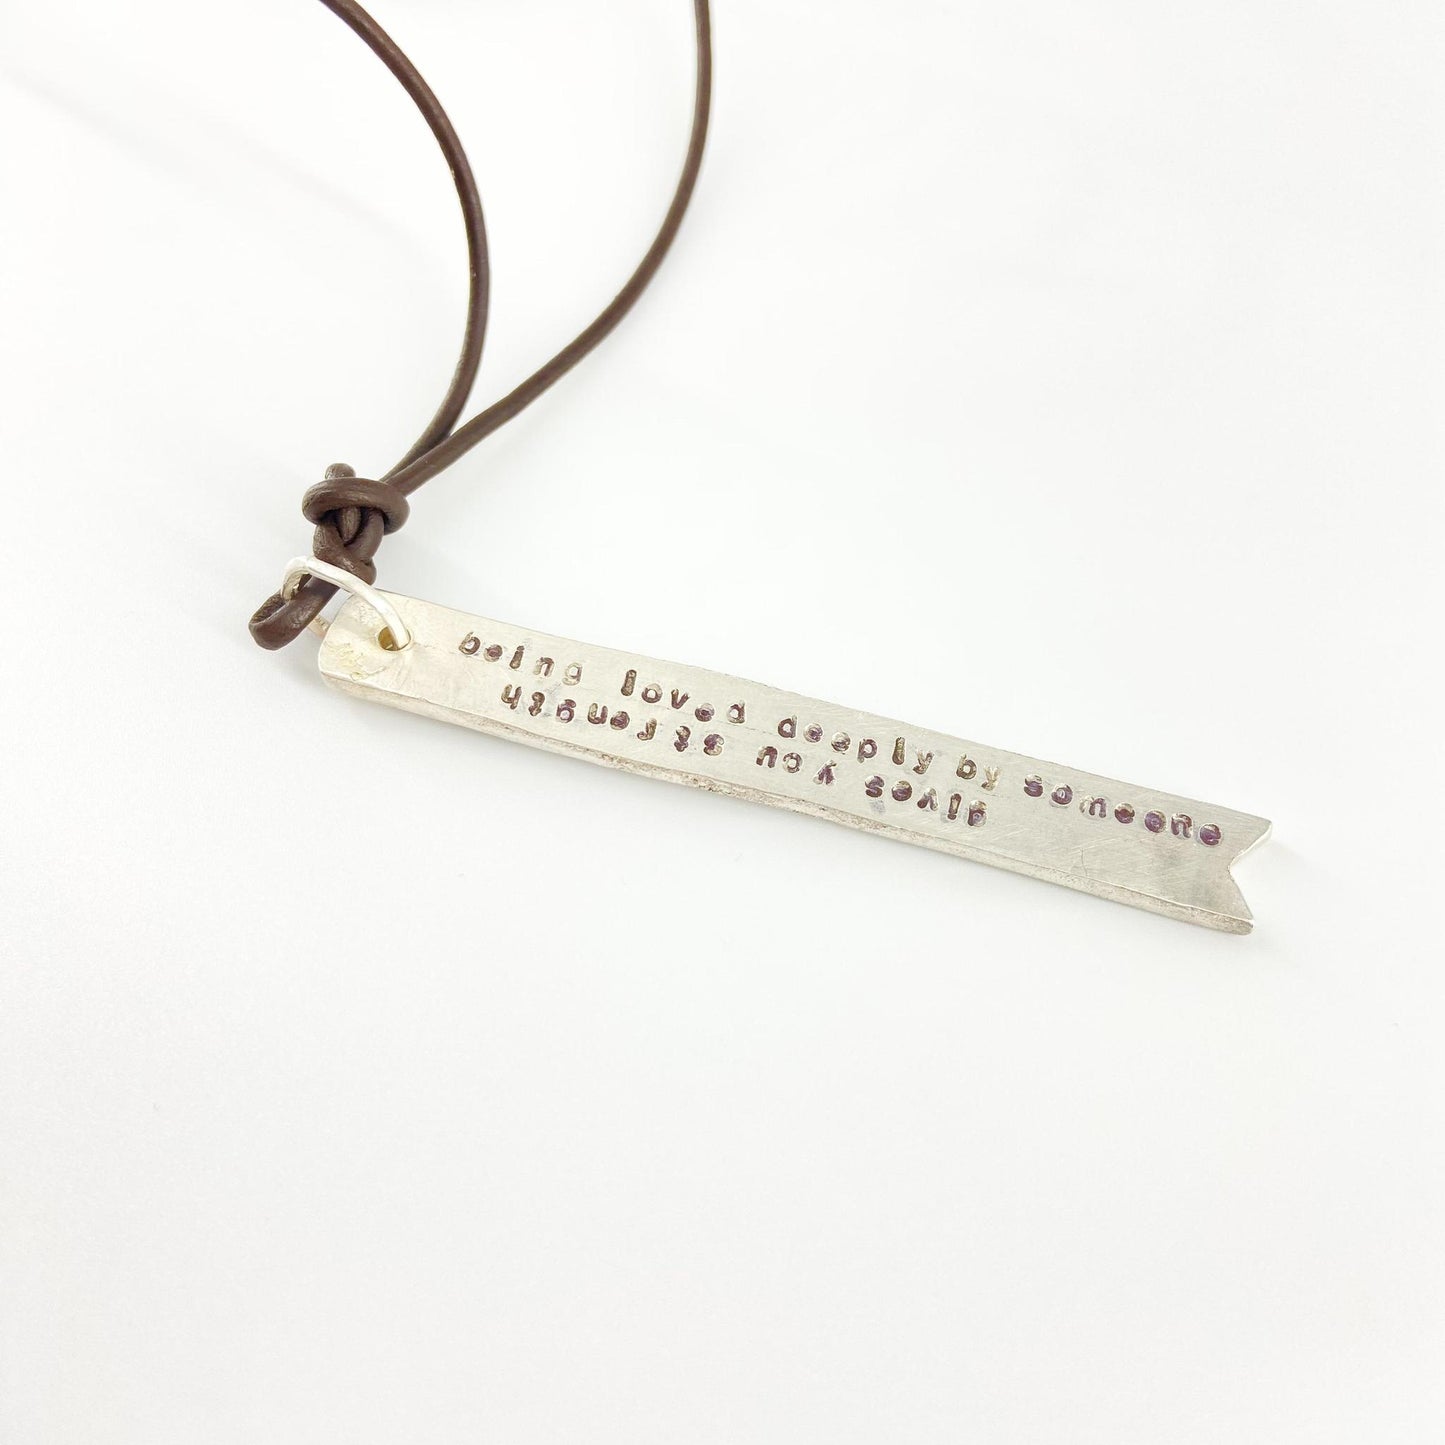 Necklace - "Being loved deeply..." - Leather/Sterling